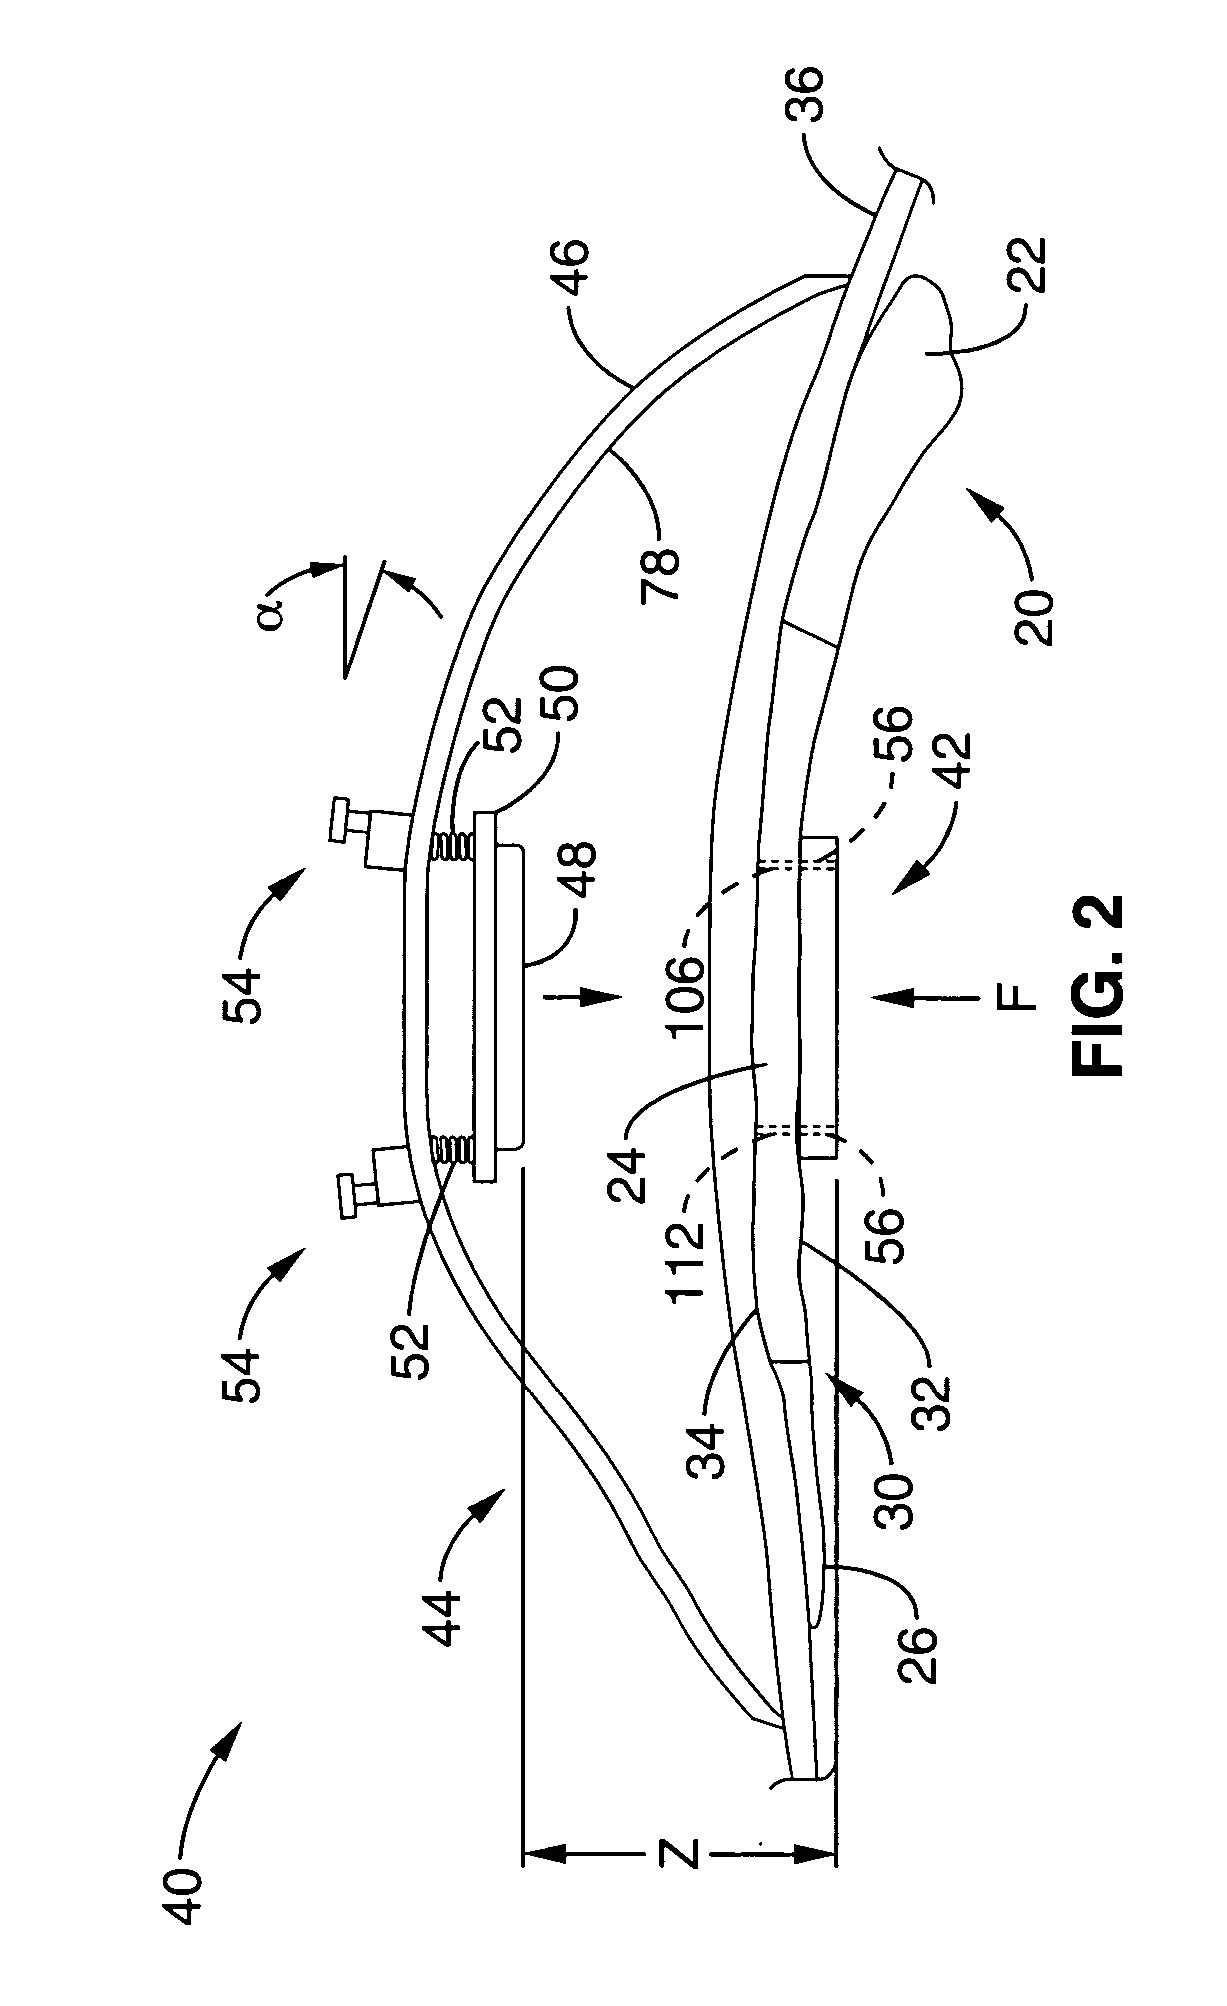 Apparatus and methods for magnetic alteration of anatomical features